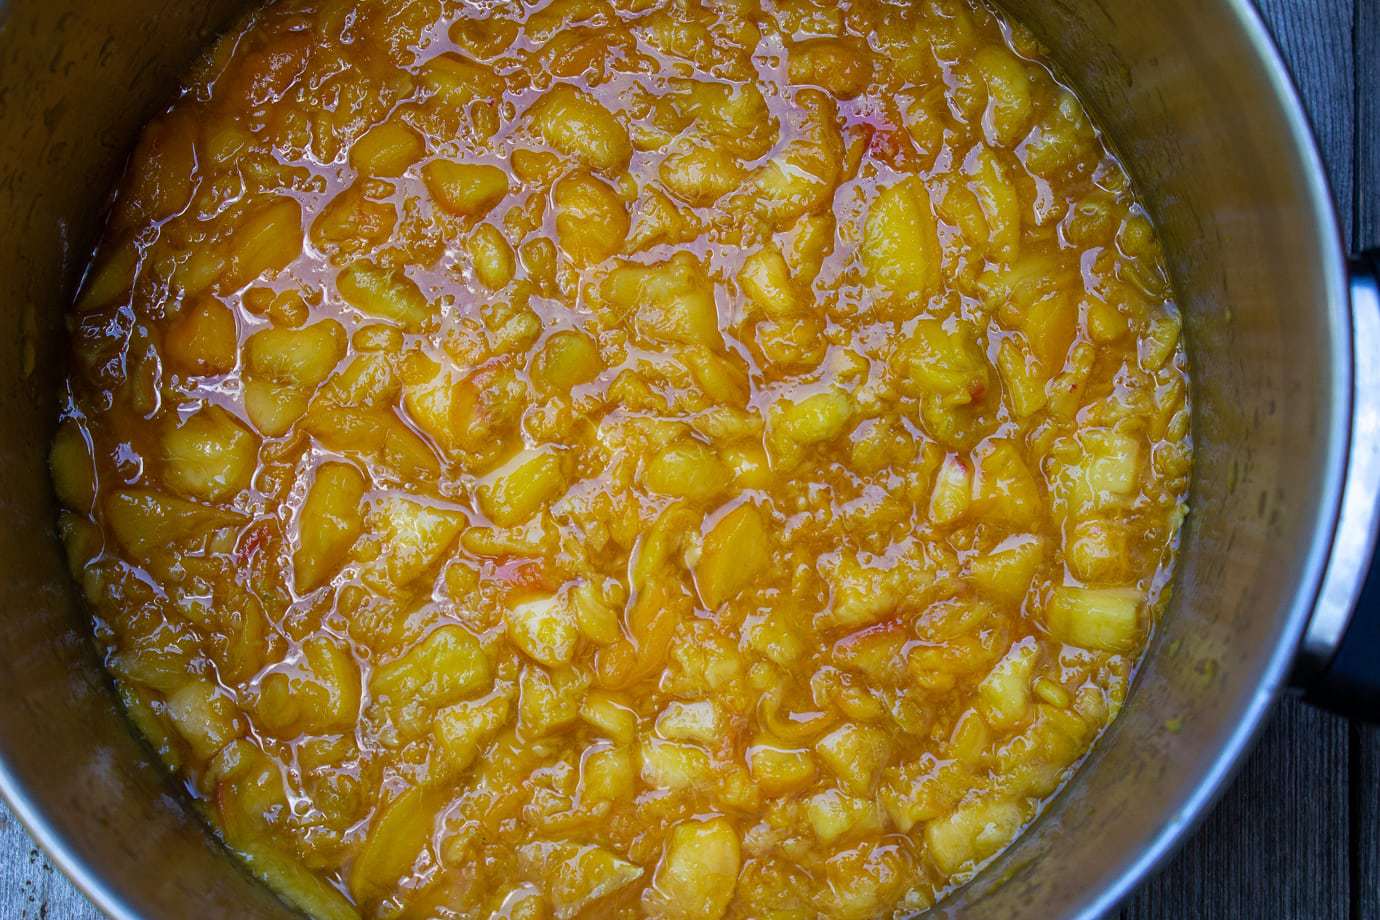 peach marmalade ingredients mixed in pot ready to cook